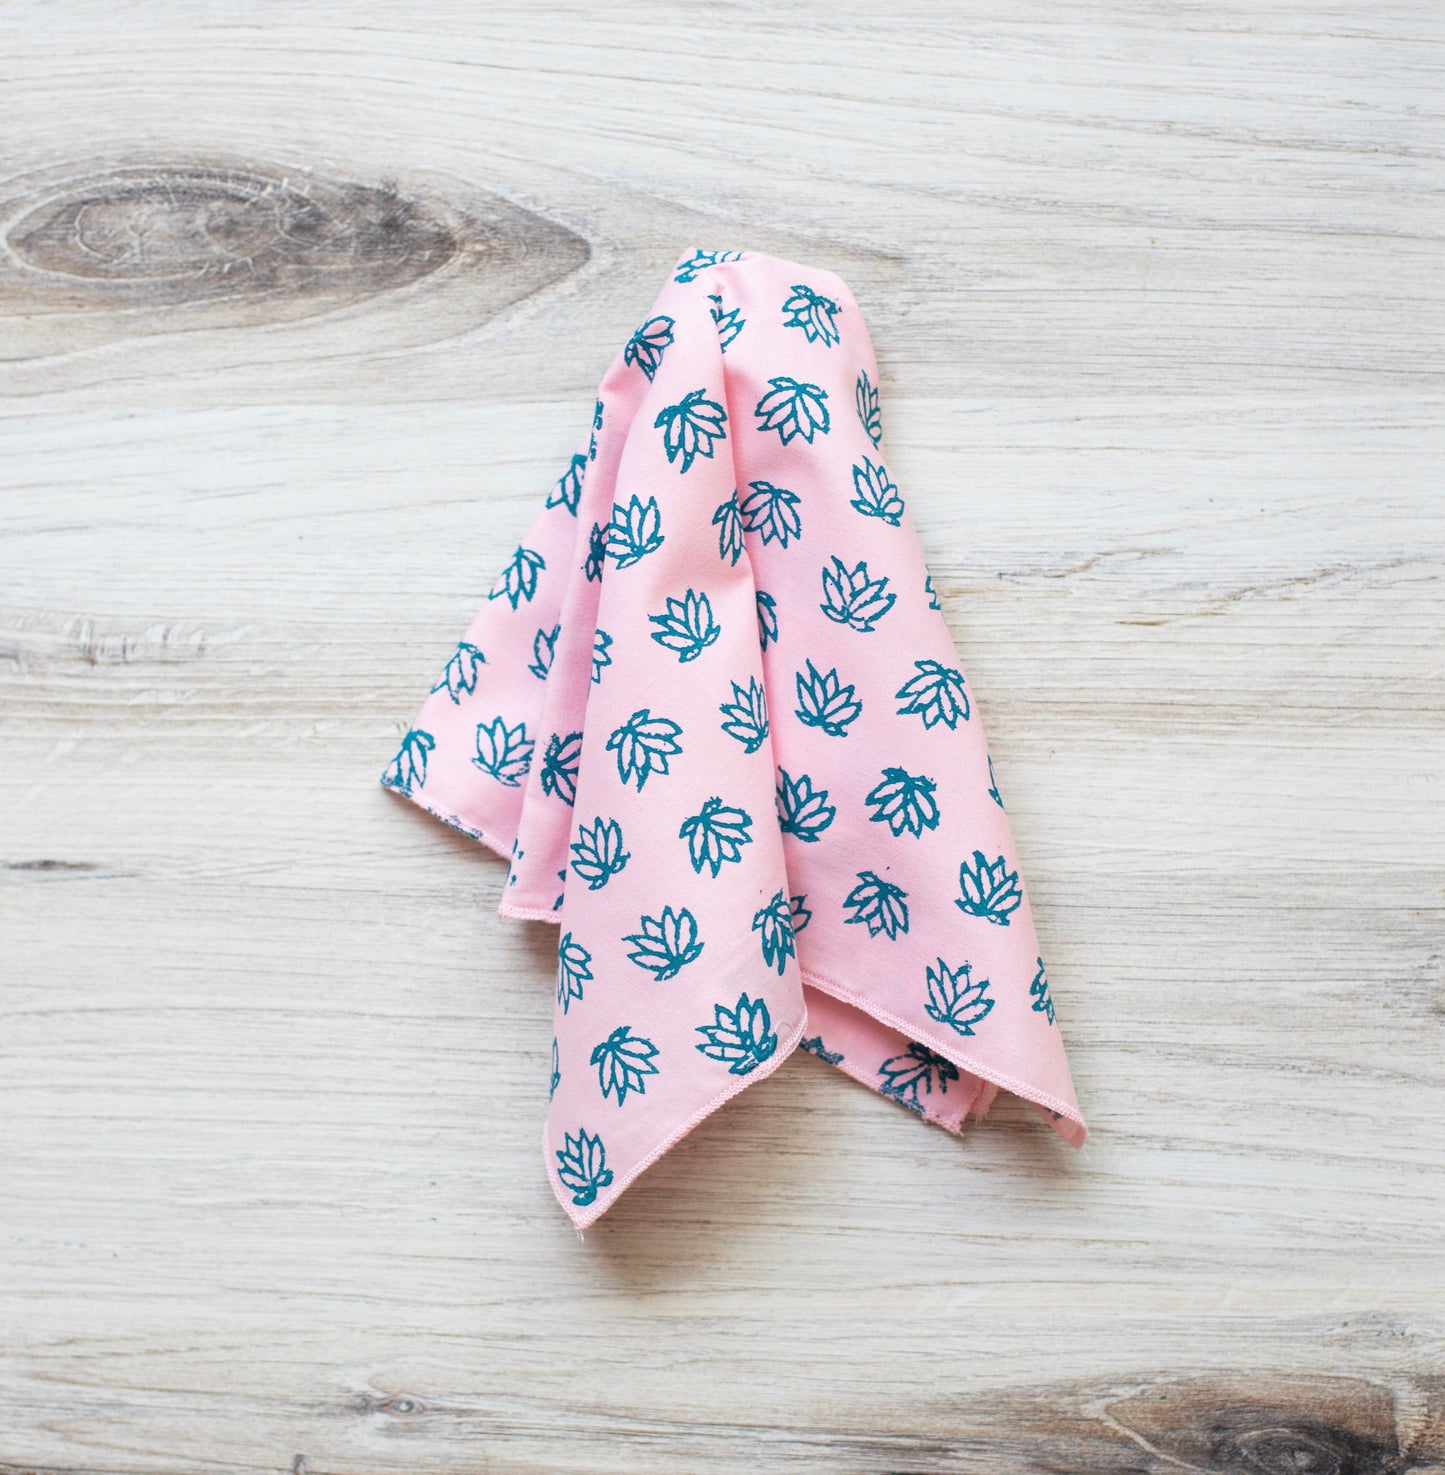 Pocket Square - Light Pink Cotton with Baby Lotus, Saltwater